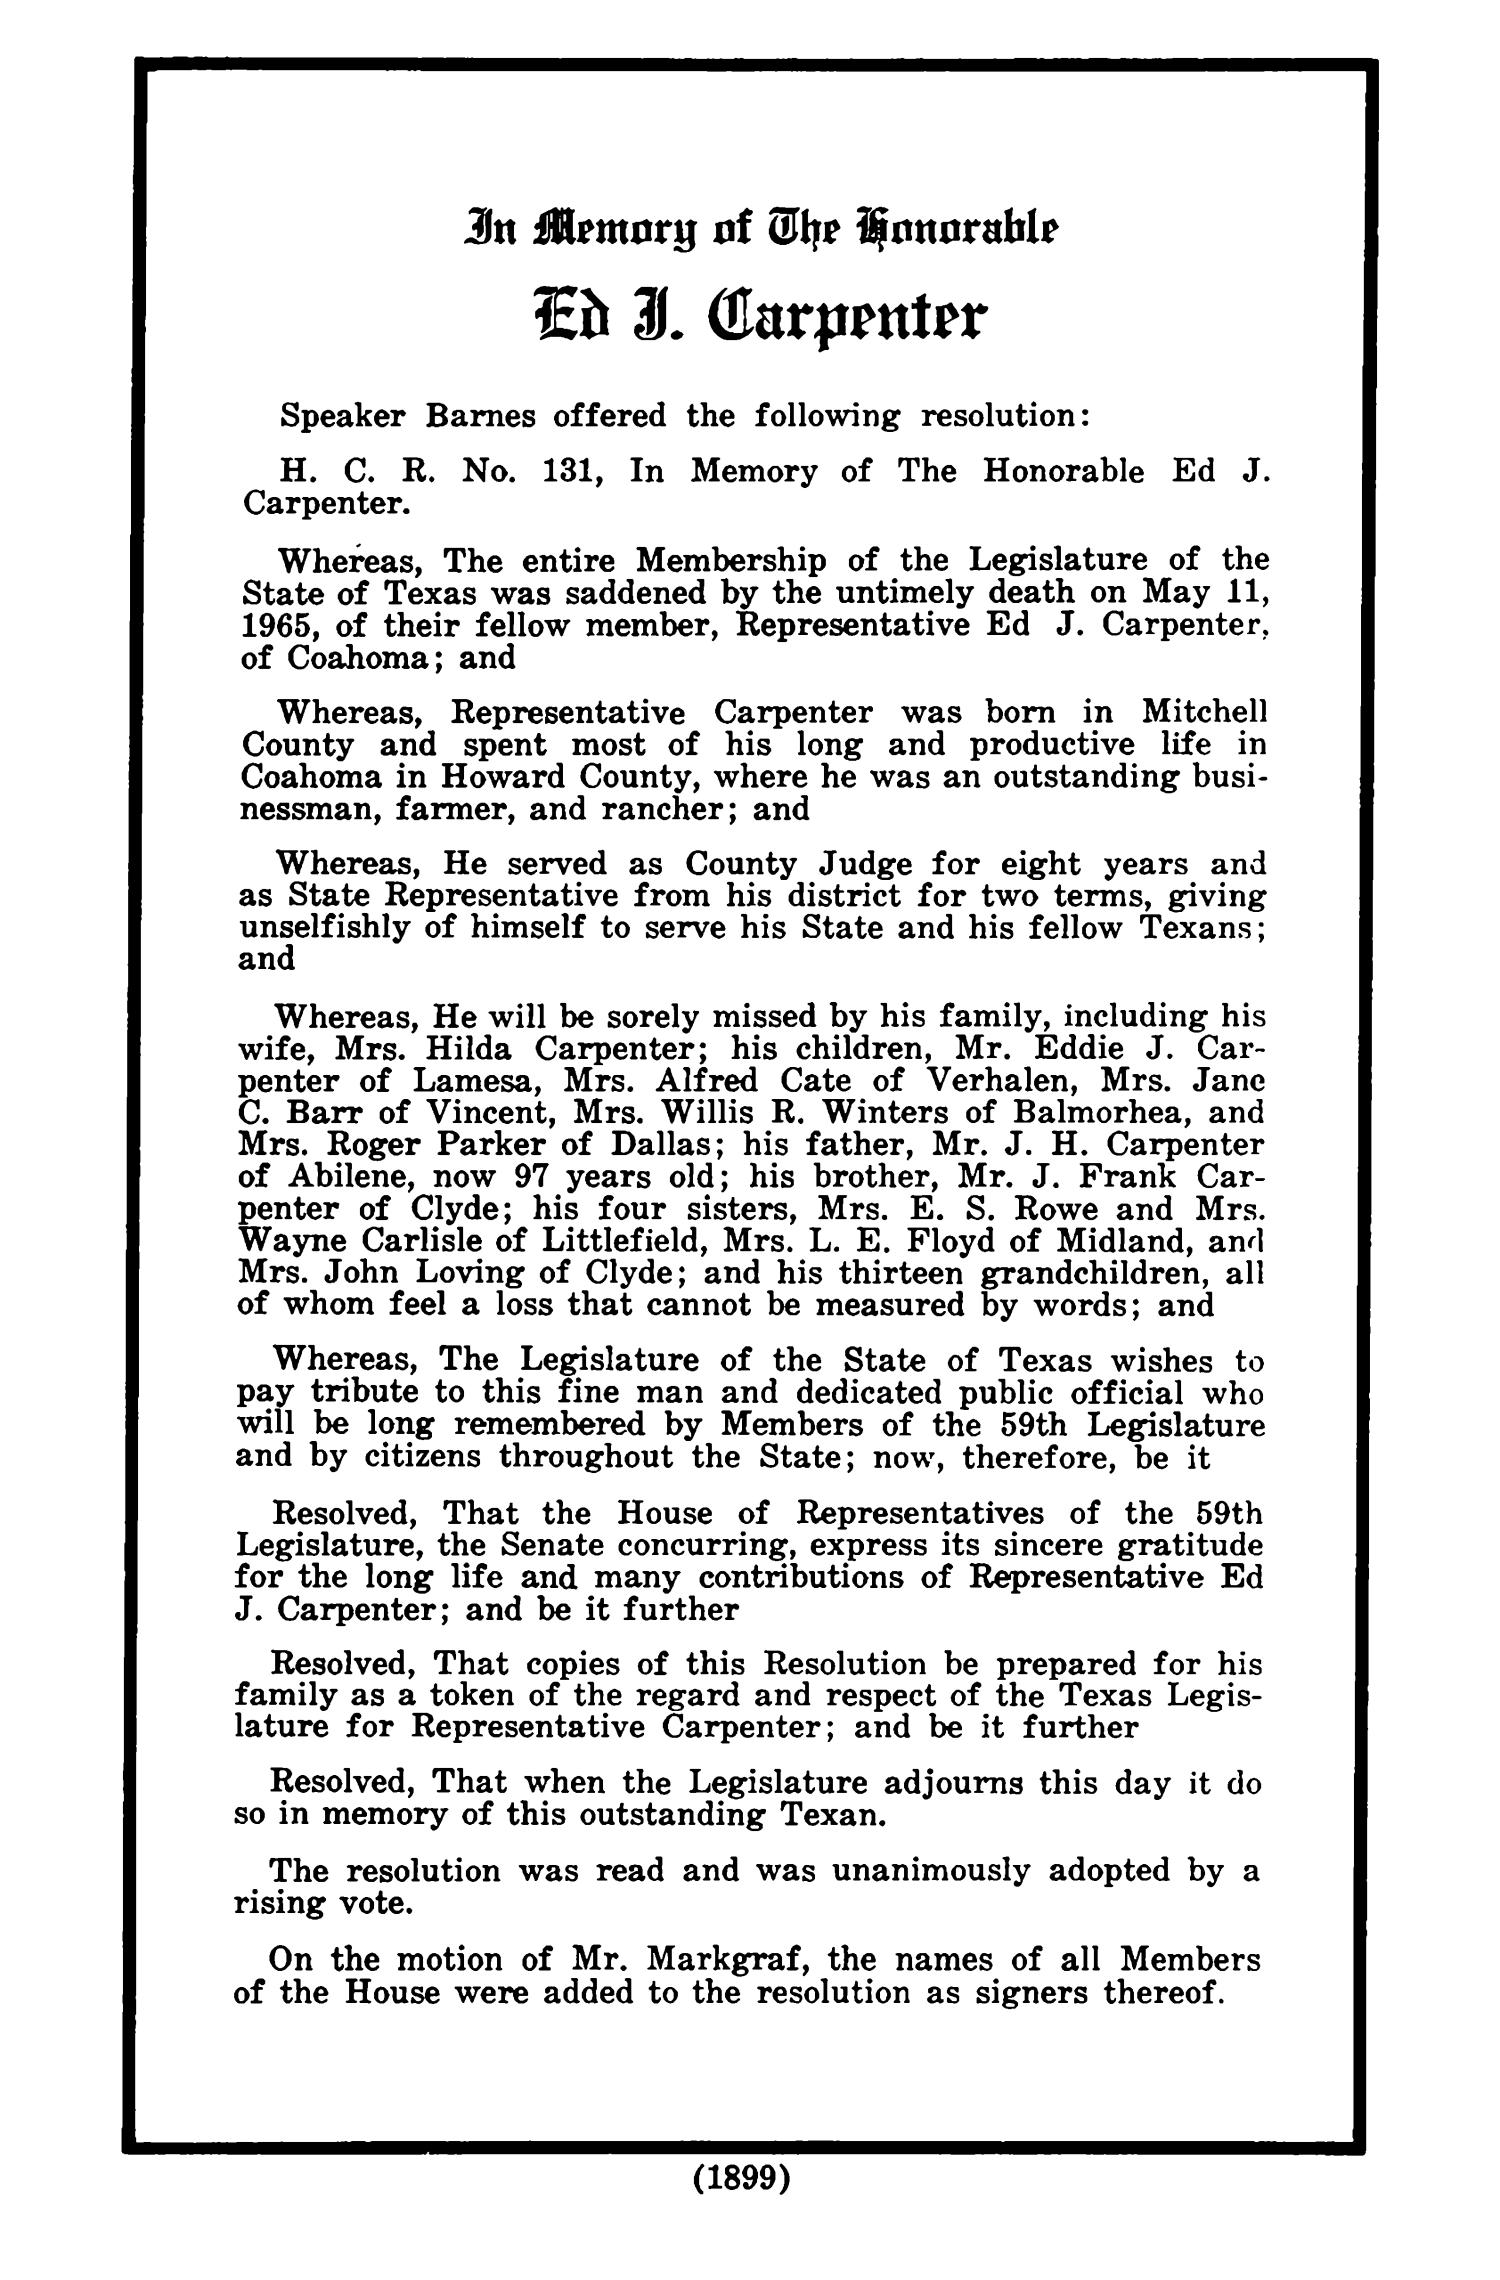 Journal of the House of Representatives Regular Session, Volume 2, and First Called Session of the Fifty-Ninth Legislature
                                                
                                                    1899
                                                